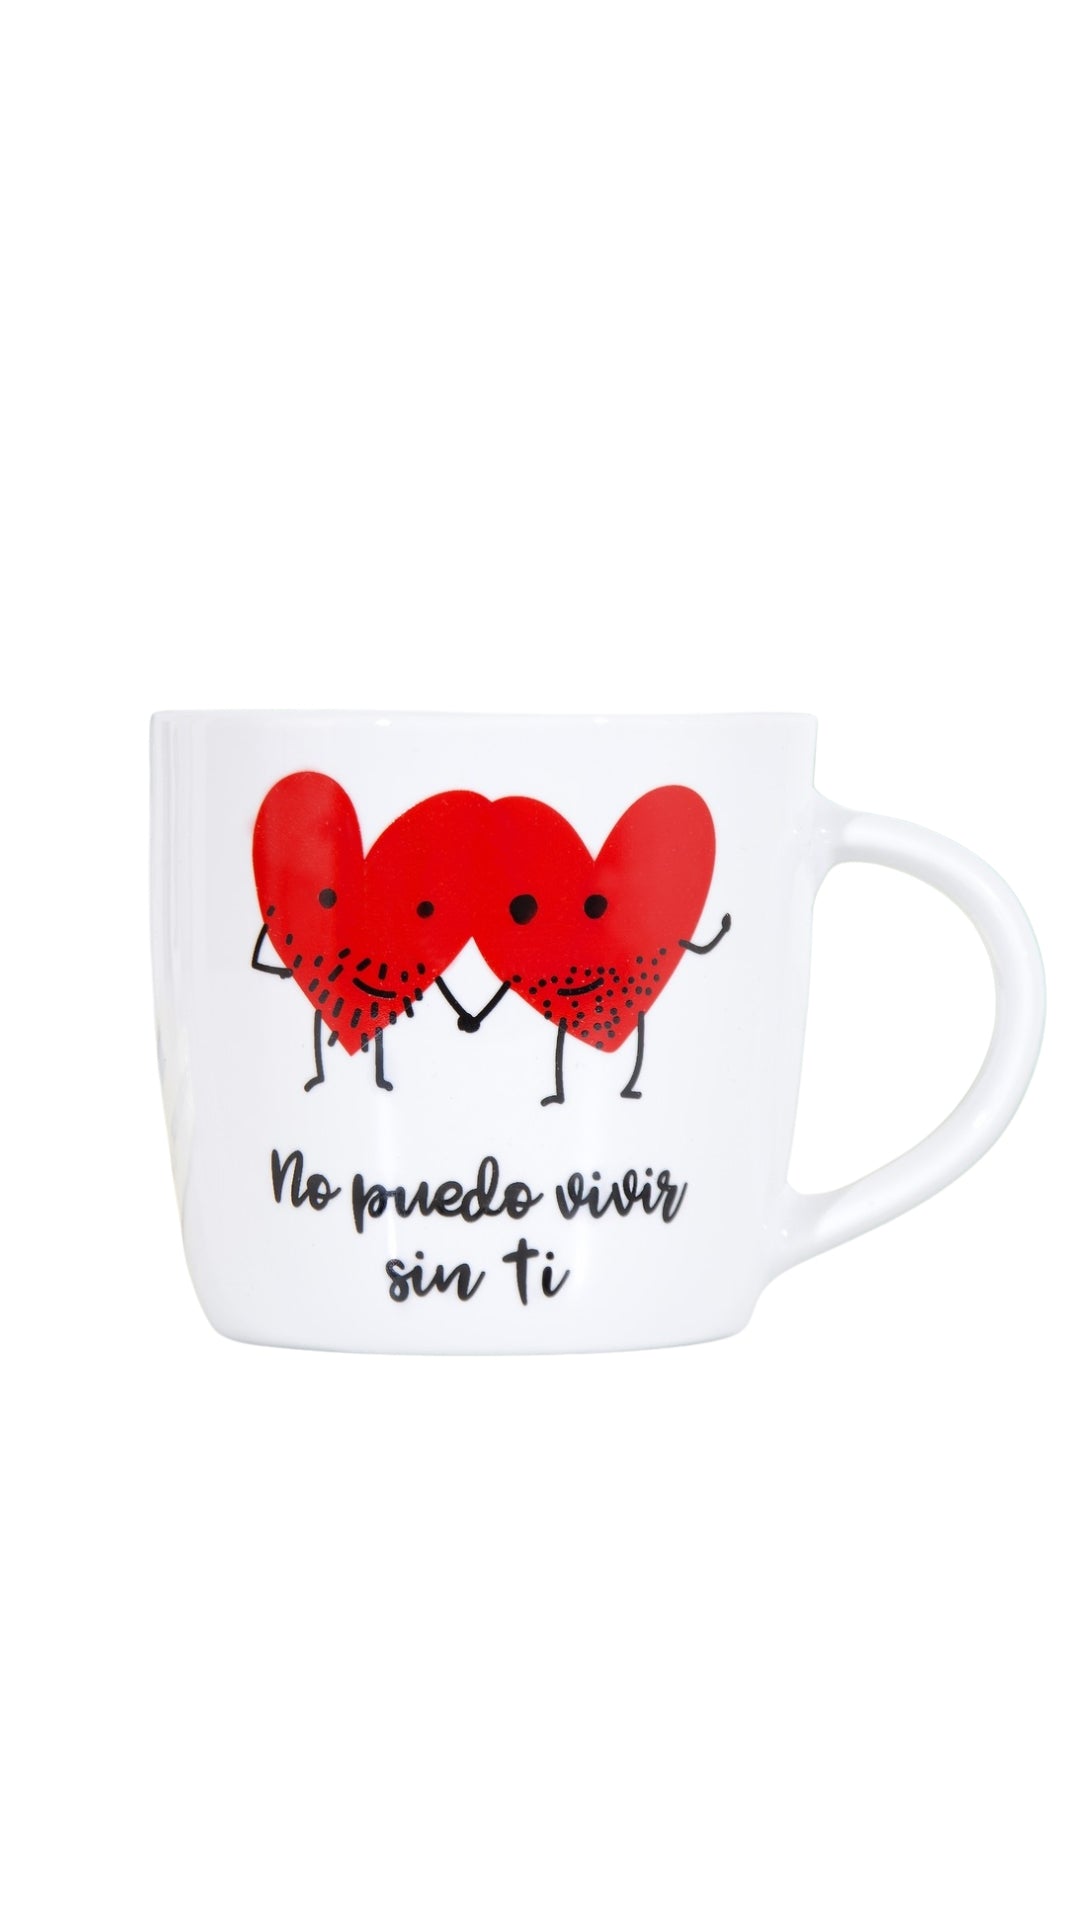 I Can't Live Without You Gay Mug 